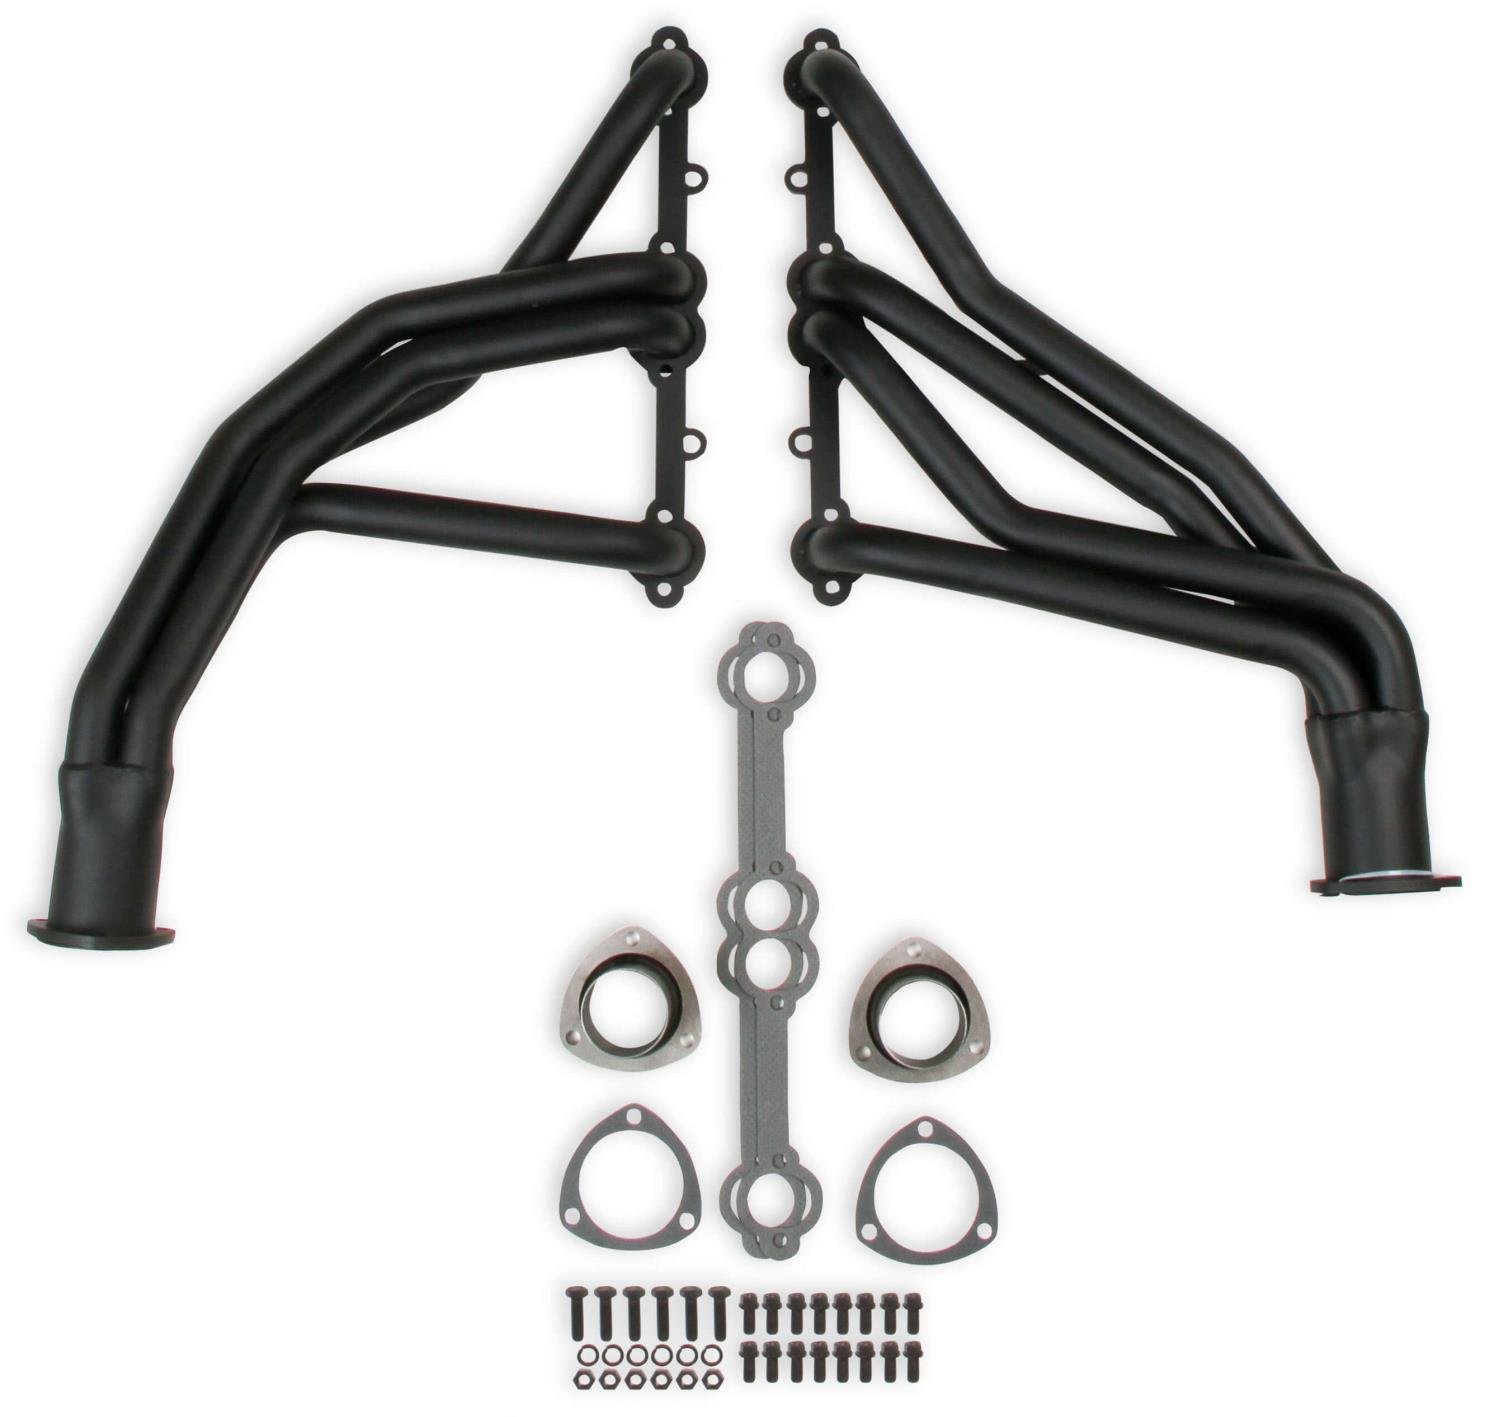 Chevy 4WD Only 67-87 283-400Pri Tube Col Size 1-5/8 x 2-1/1 Flowtech 11506 Headers 